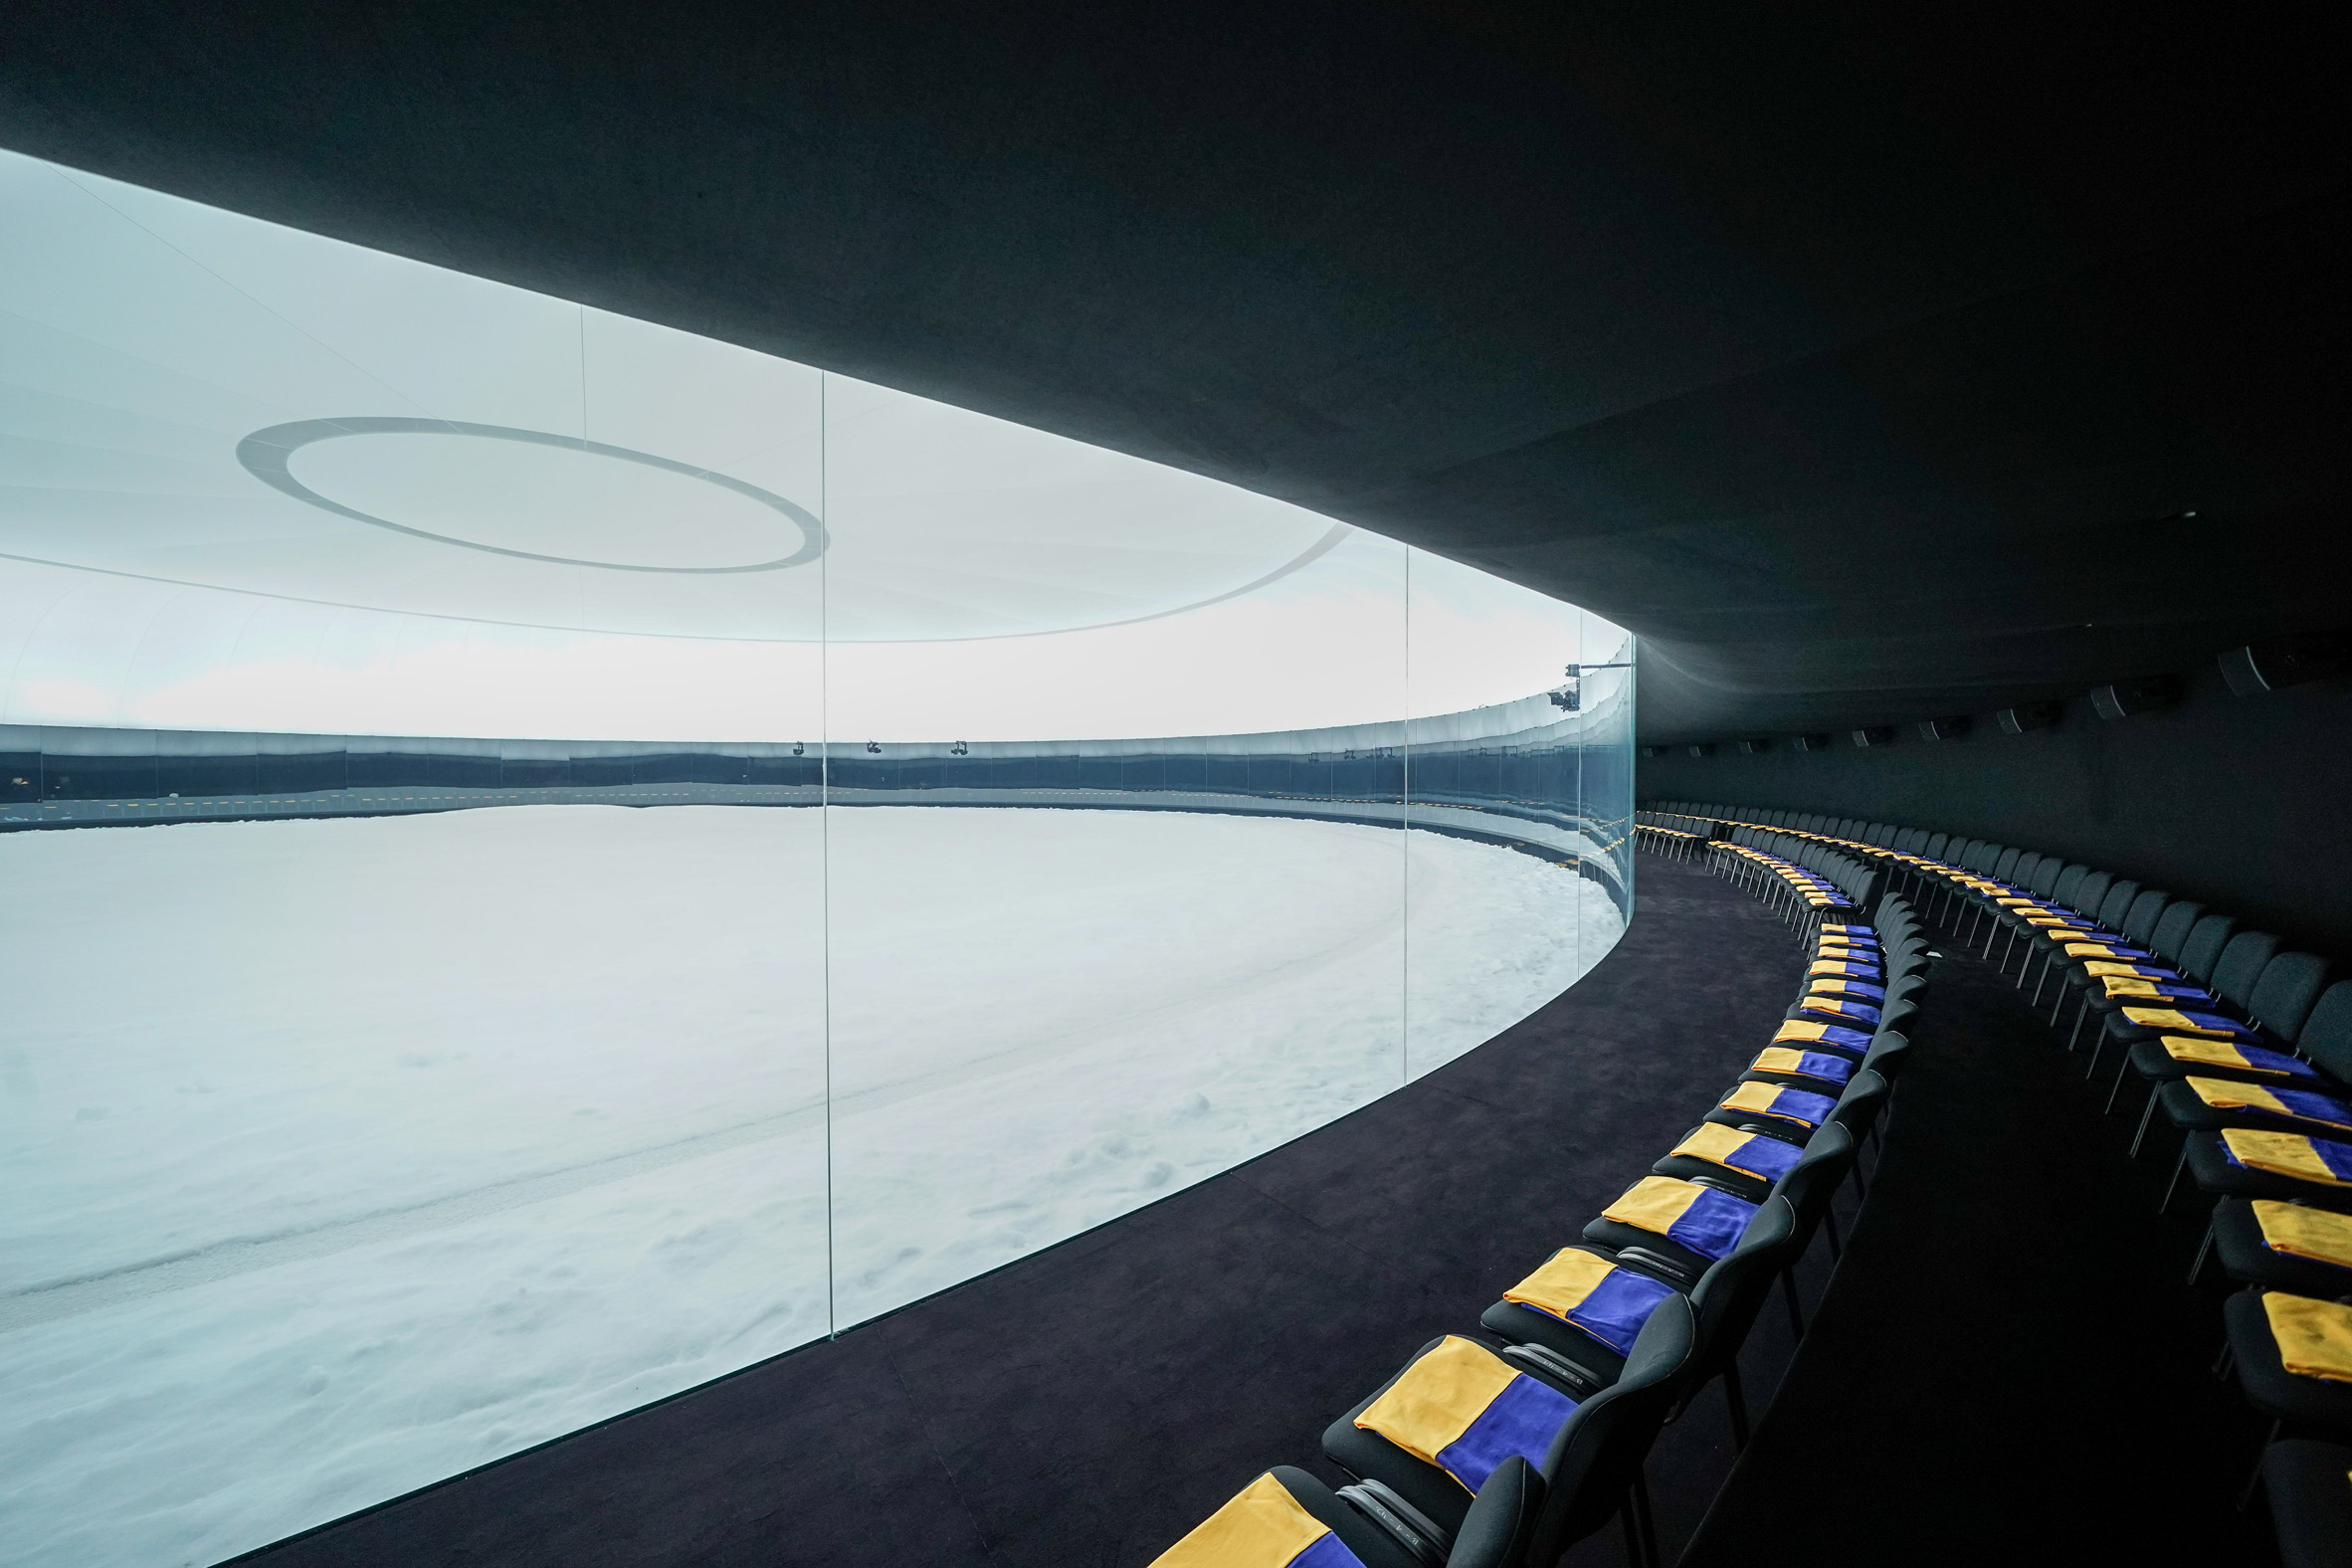 Image of the audience seating area at the Balenciaga Autumn Winter 2022 show